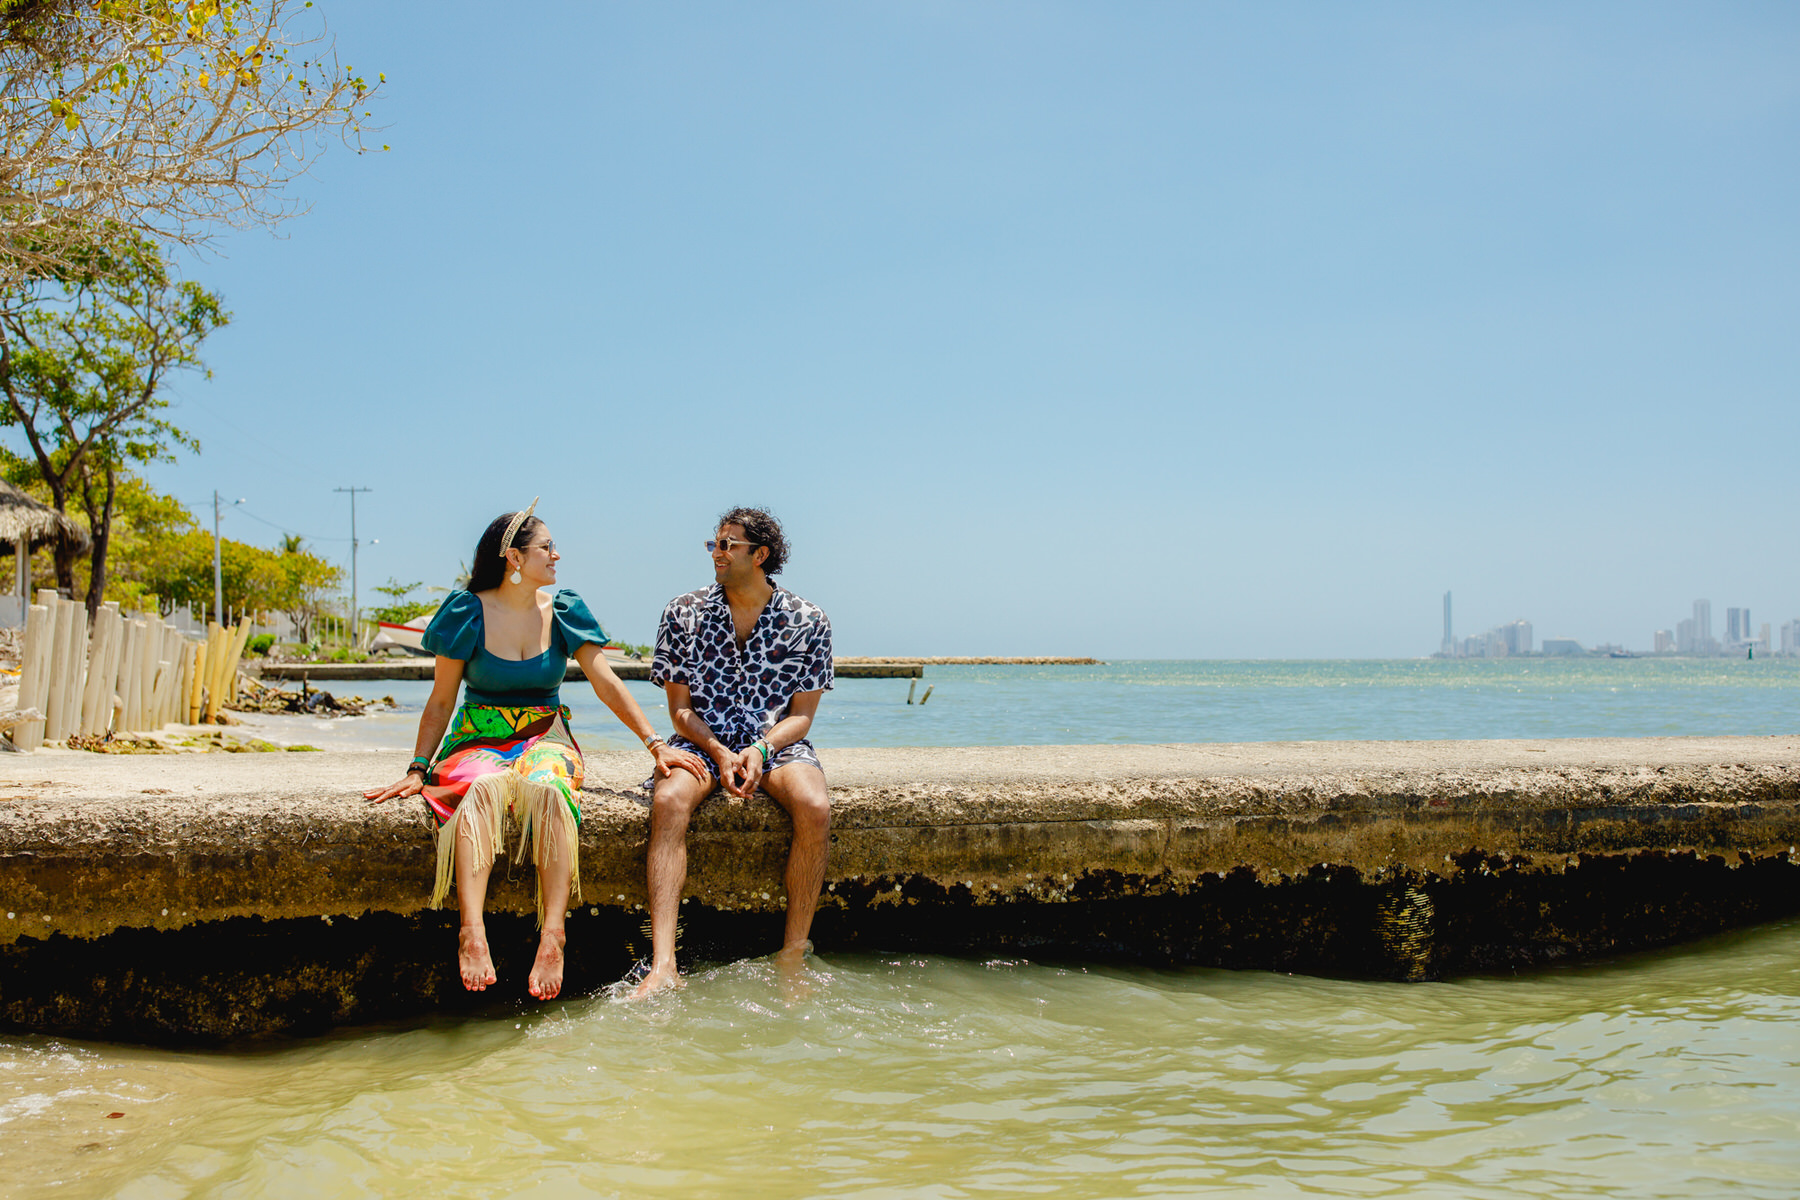 Day-after-wedding photo session in Tierra Bomba, Cartagena. Photos by Take It Photo